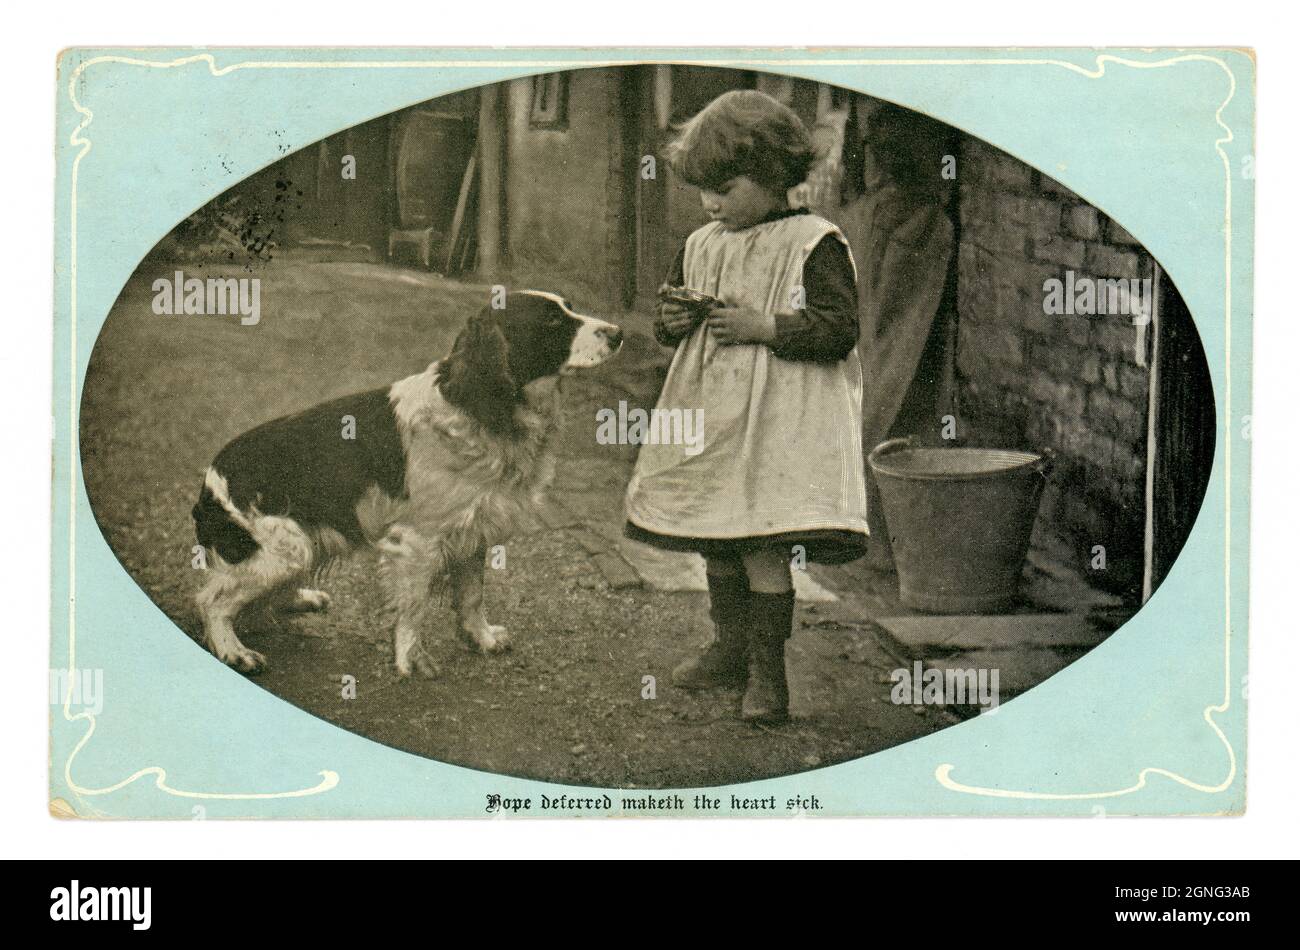 Original sentimental Edwardian greetings real photographic postcard, of a young girl in a farmyard wearing a pinafore feeding scraps to a waiting springer spaniel  - 'Hope deferred maketh the heart sick' is the inscription. posted April 1904, Published by Marcus Ward & Co. U.K. Stock Photo